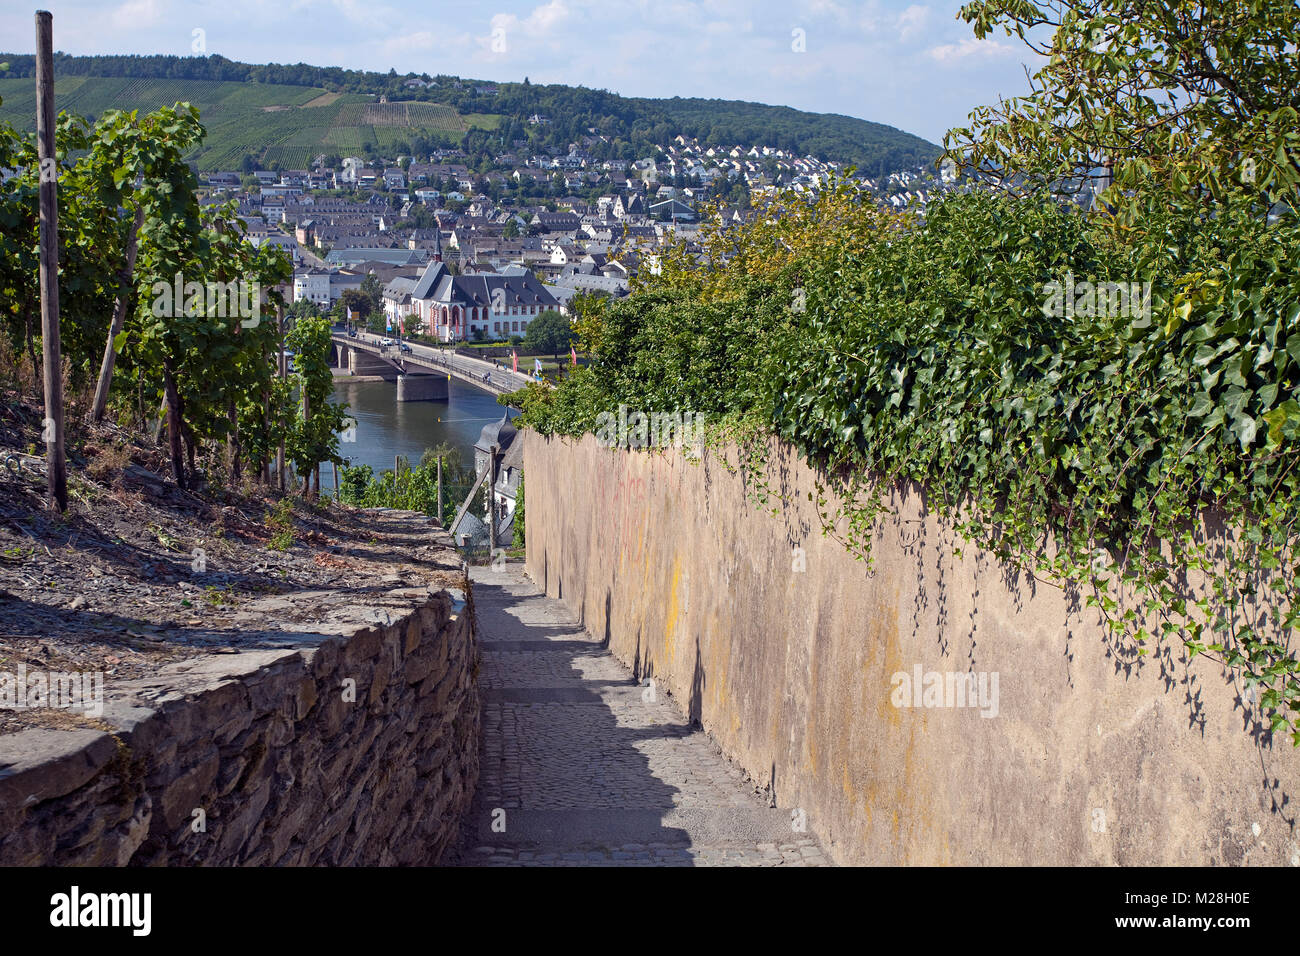 View from a trail between vine stocks on Bernkastel-Kues and Moselle river, Rhineland-Palatinate, Germany, Europe Stock Photo